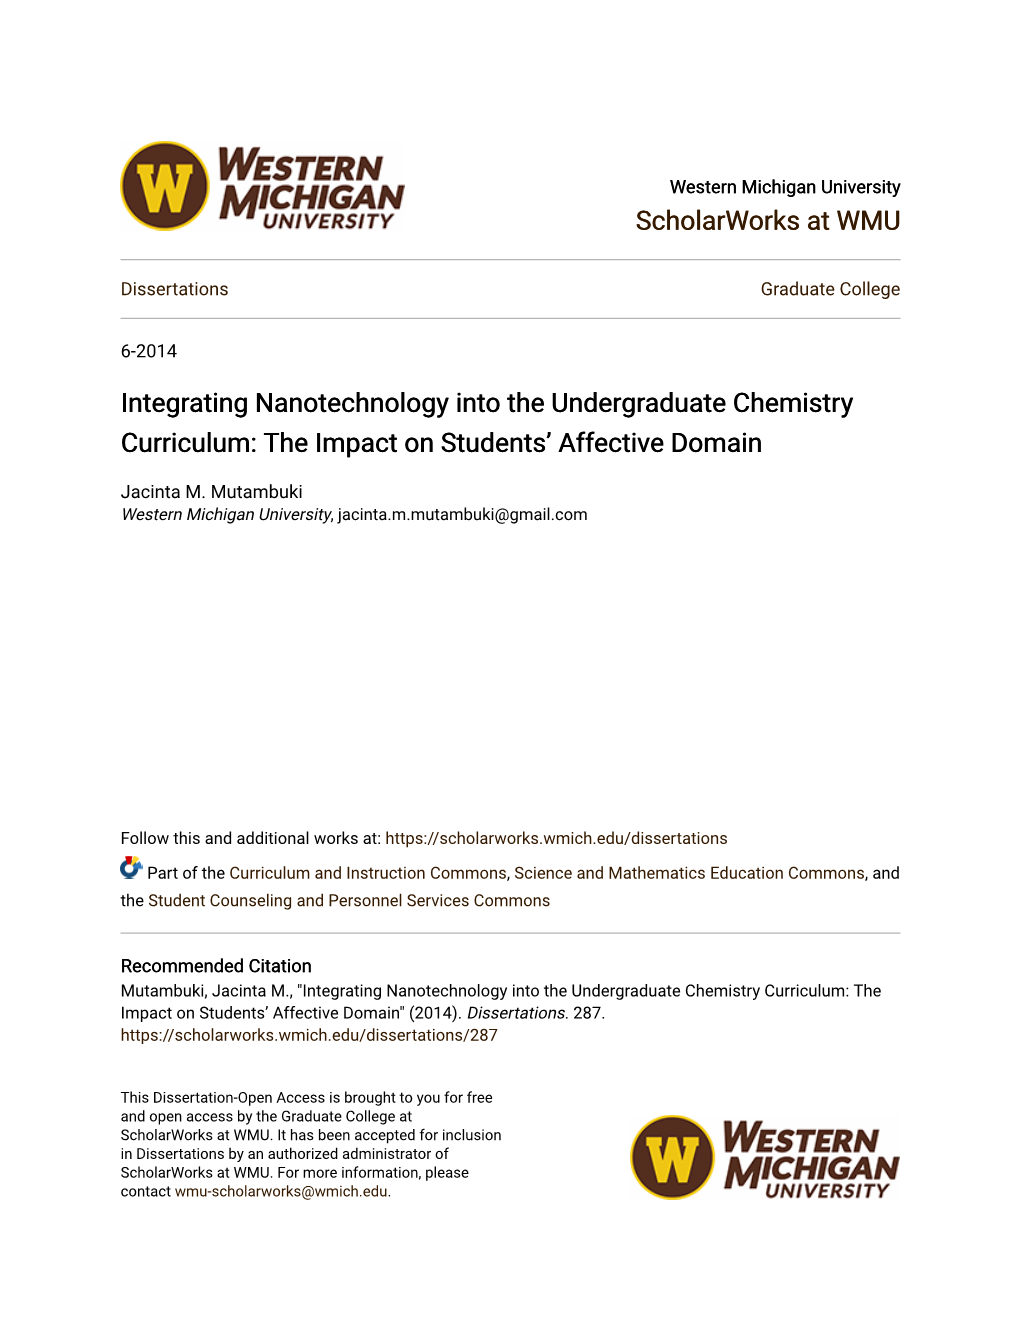 Integrating Nanotechnology Into the Undergraduate Chemistry Curriculum: the Impact on Students' Affective Domain